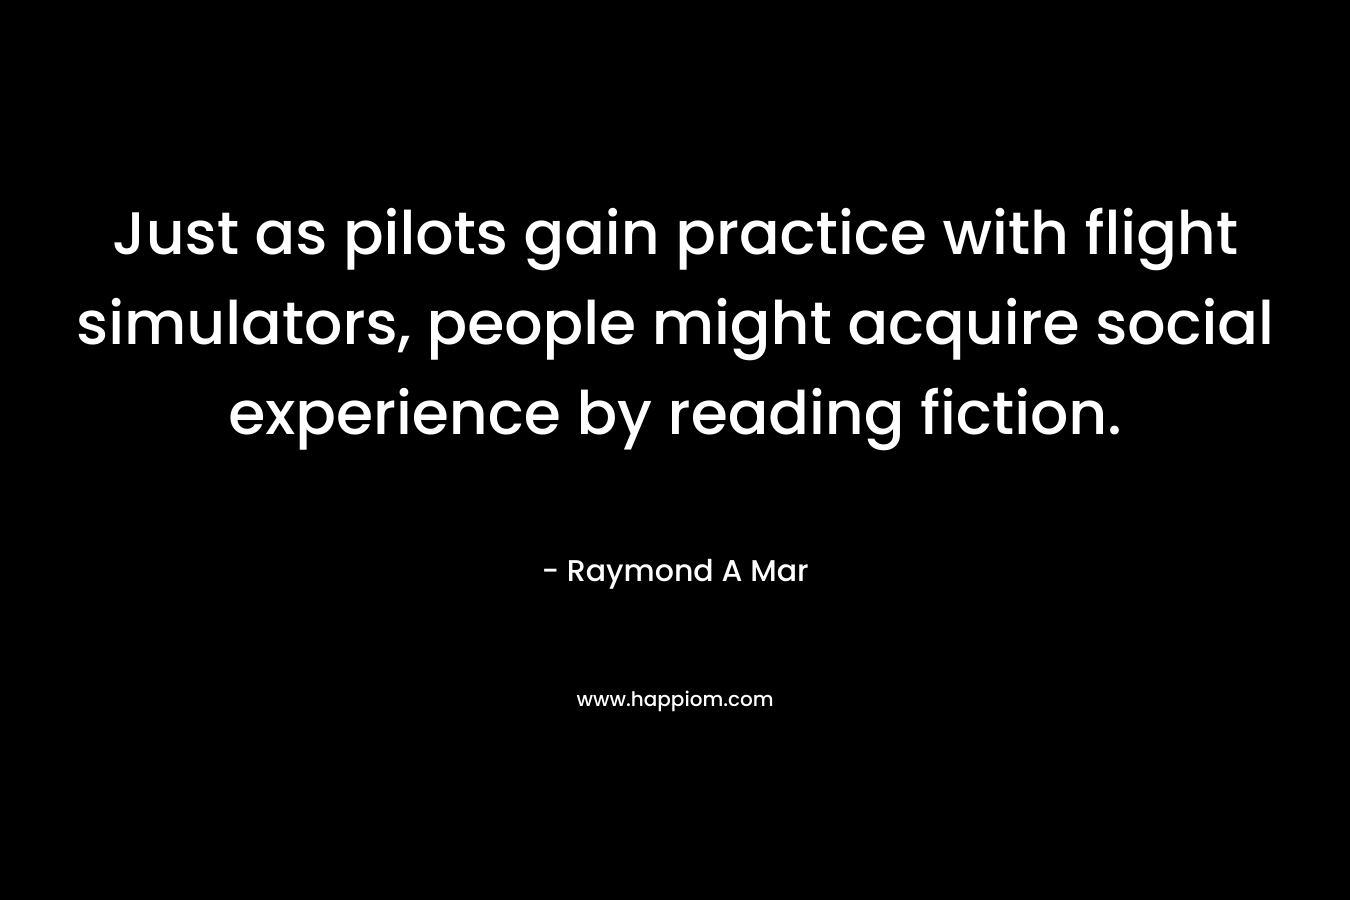 Just as pilots gain practice with flight simulators, people might acquire social experience by reading fiction. – Raymond A Mar